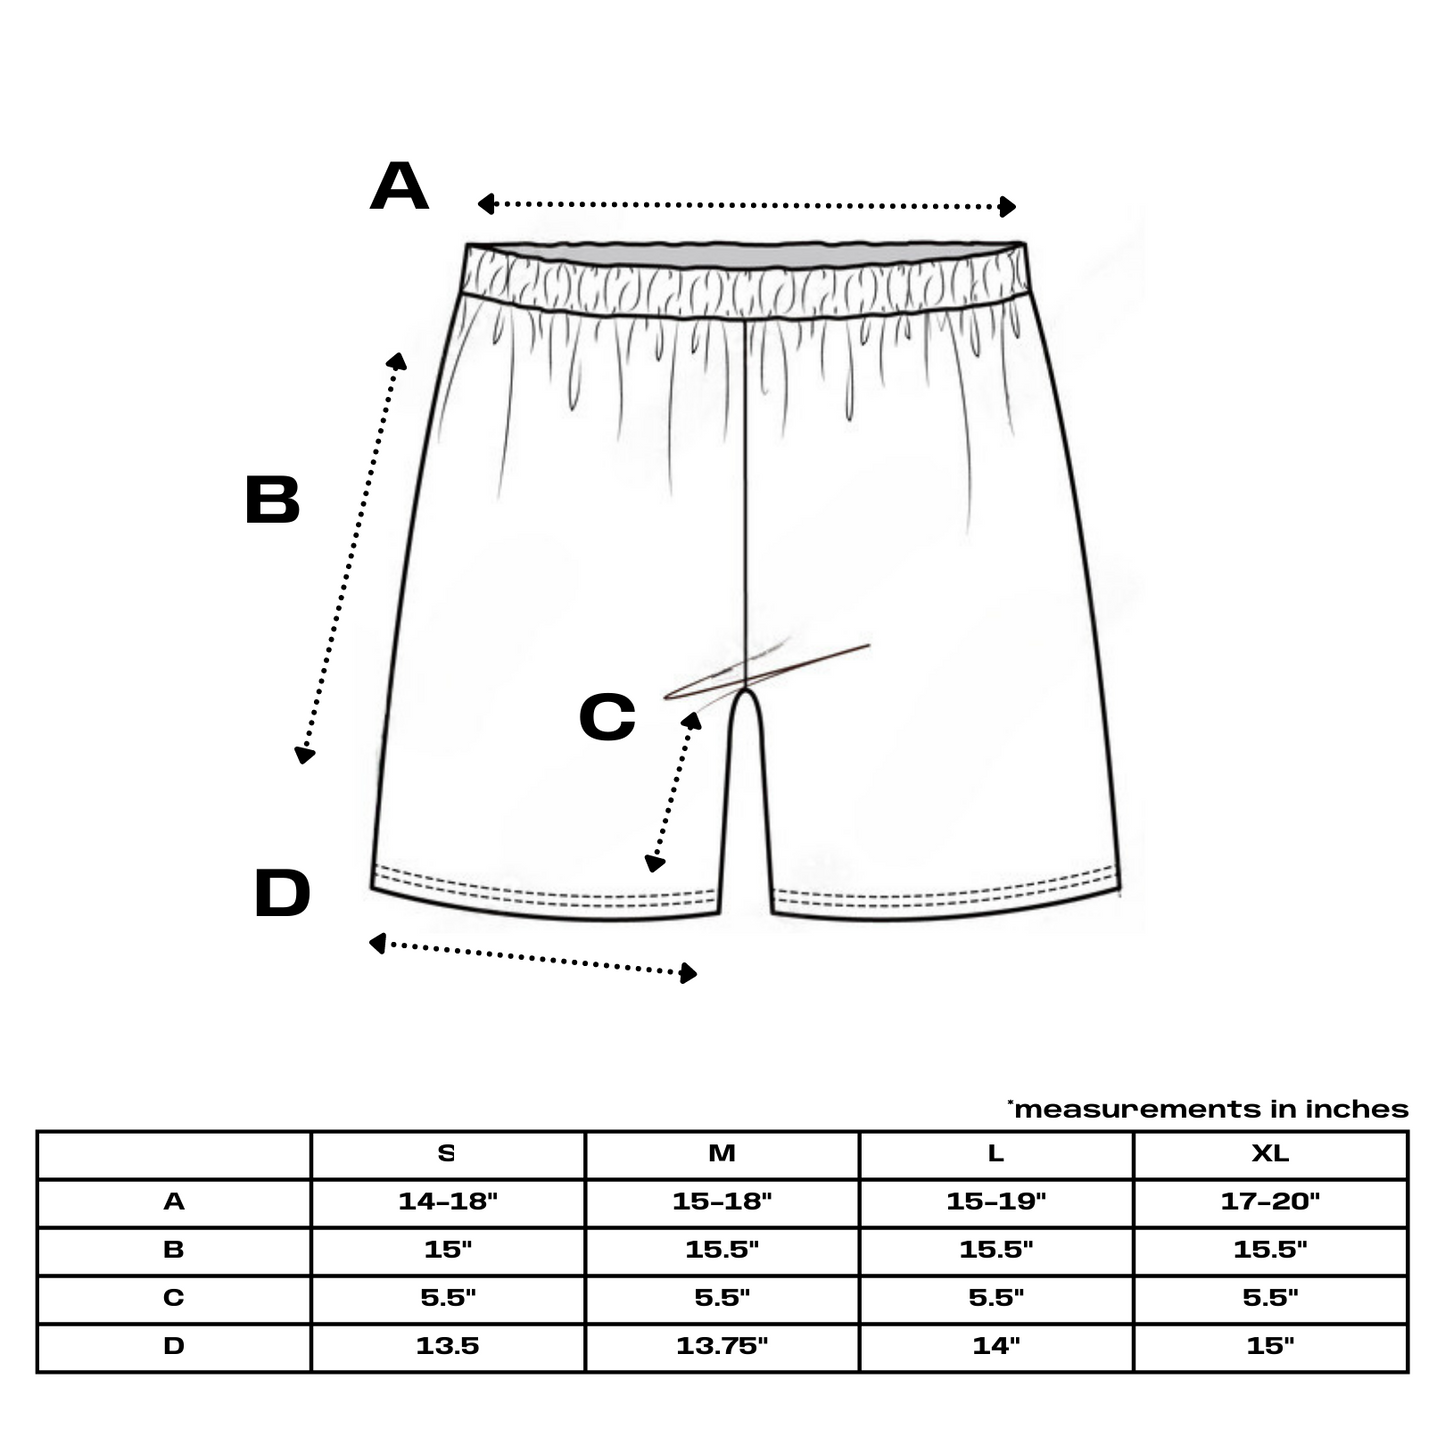 The A-Short